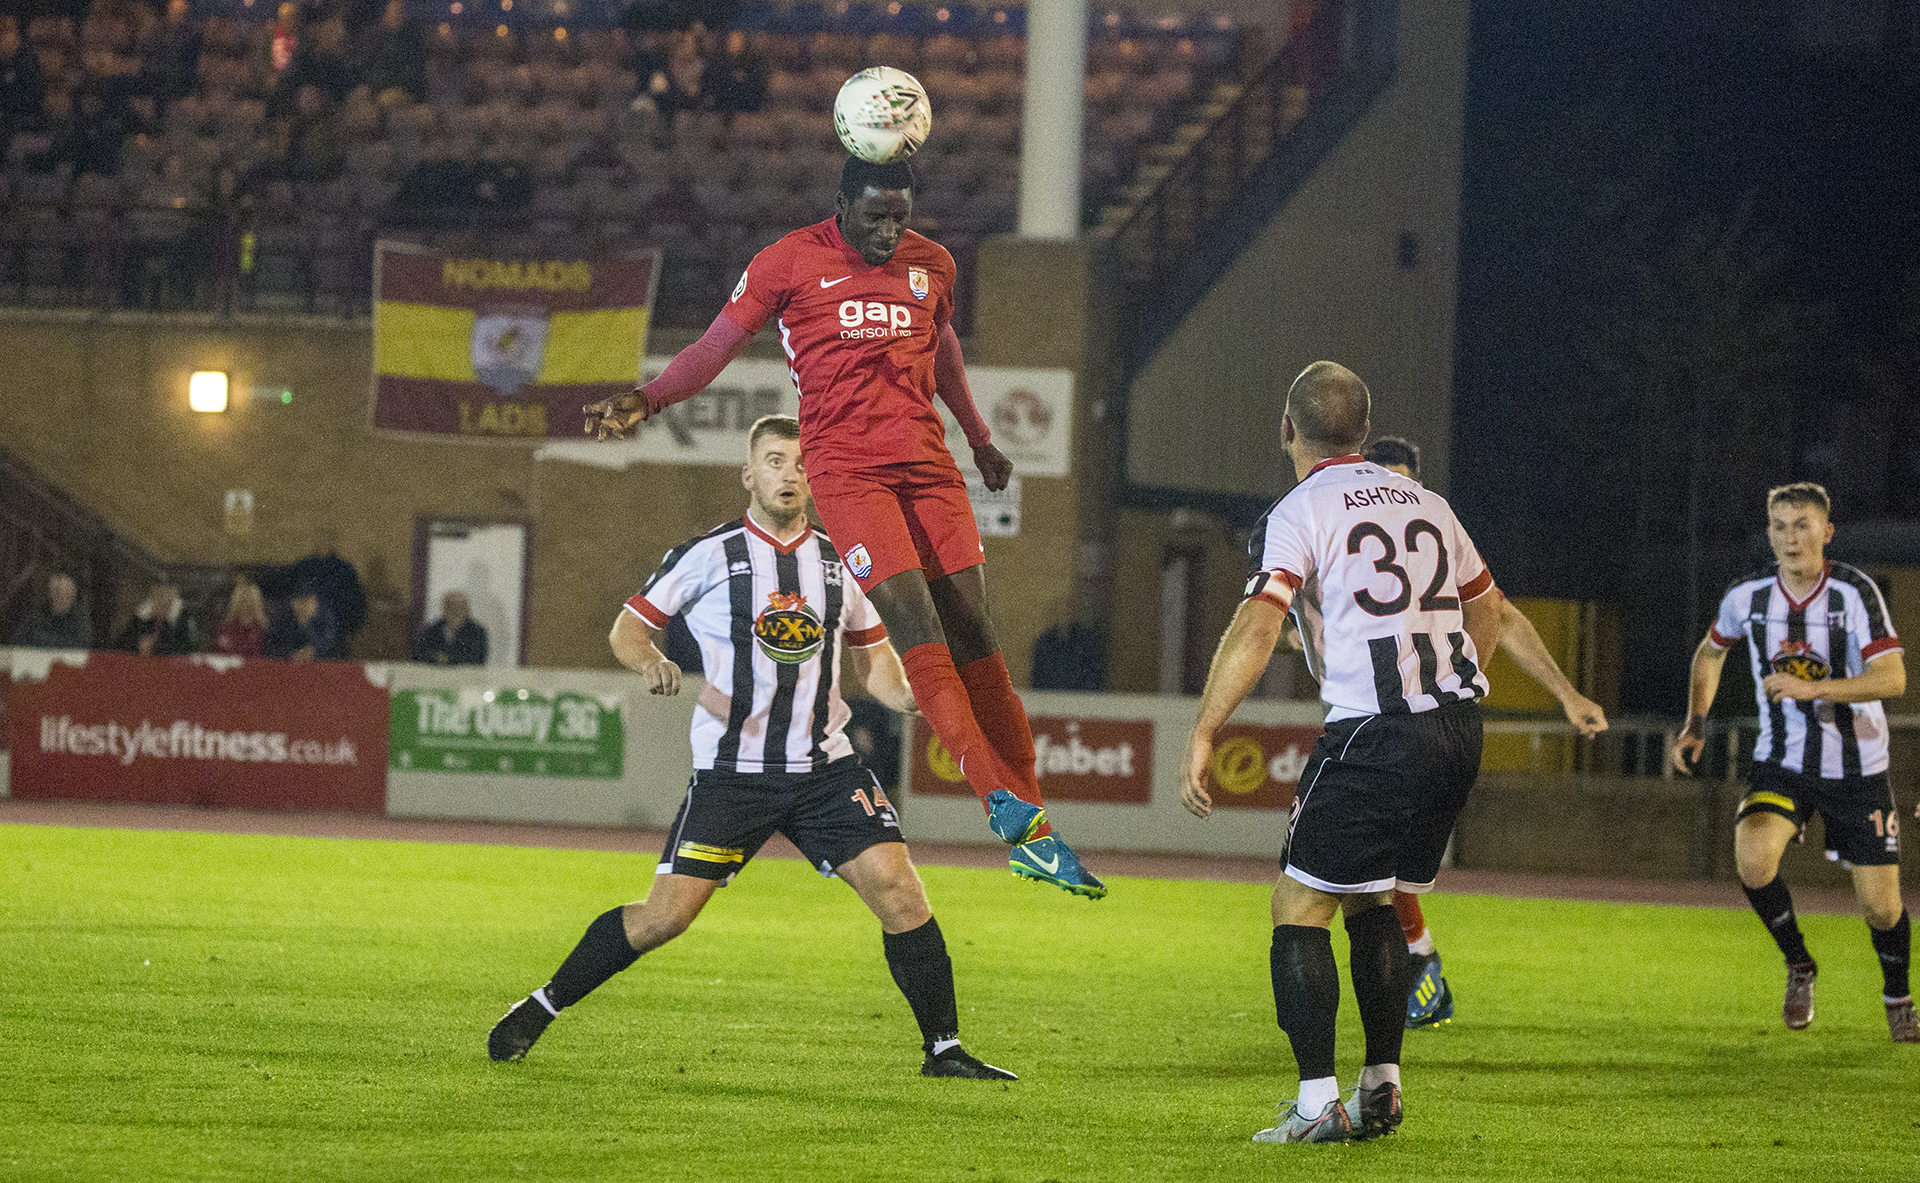 Michael Bakare almost scored this header within minutes of his introduction | © NCM Media